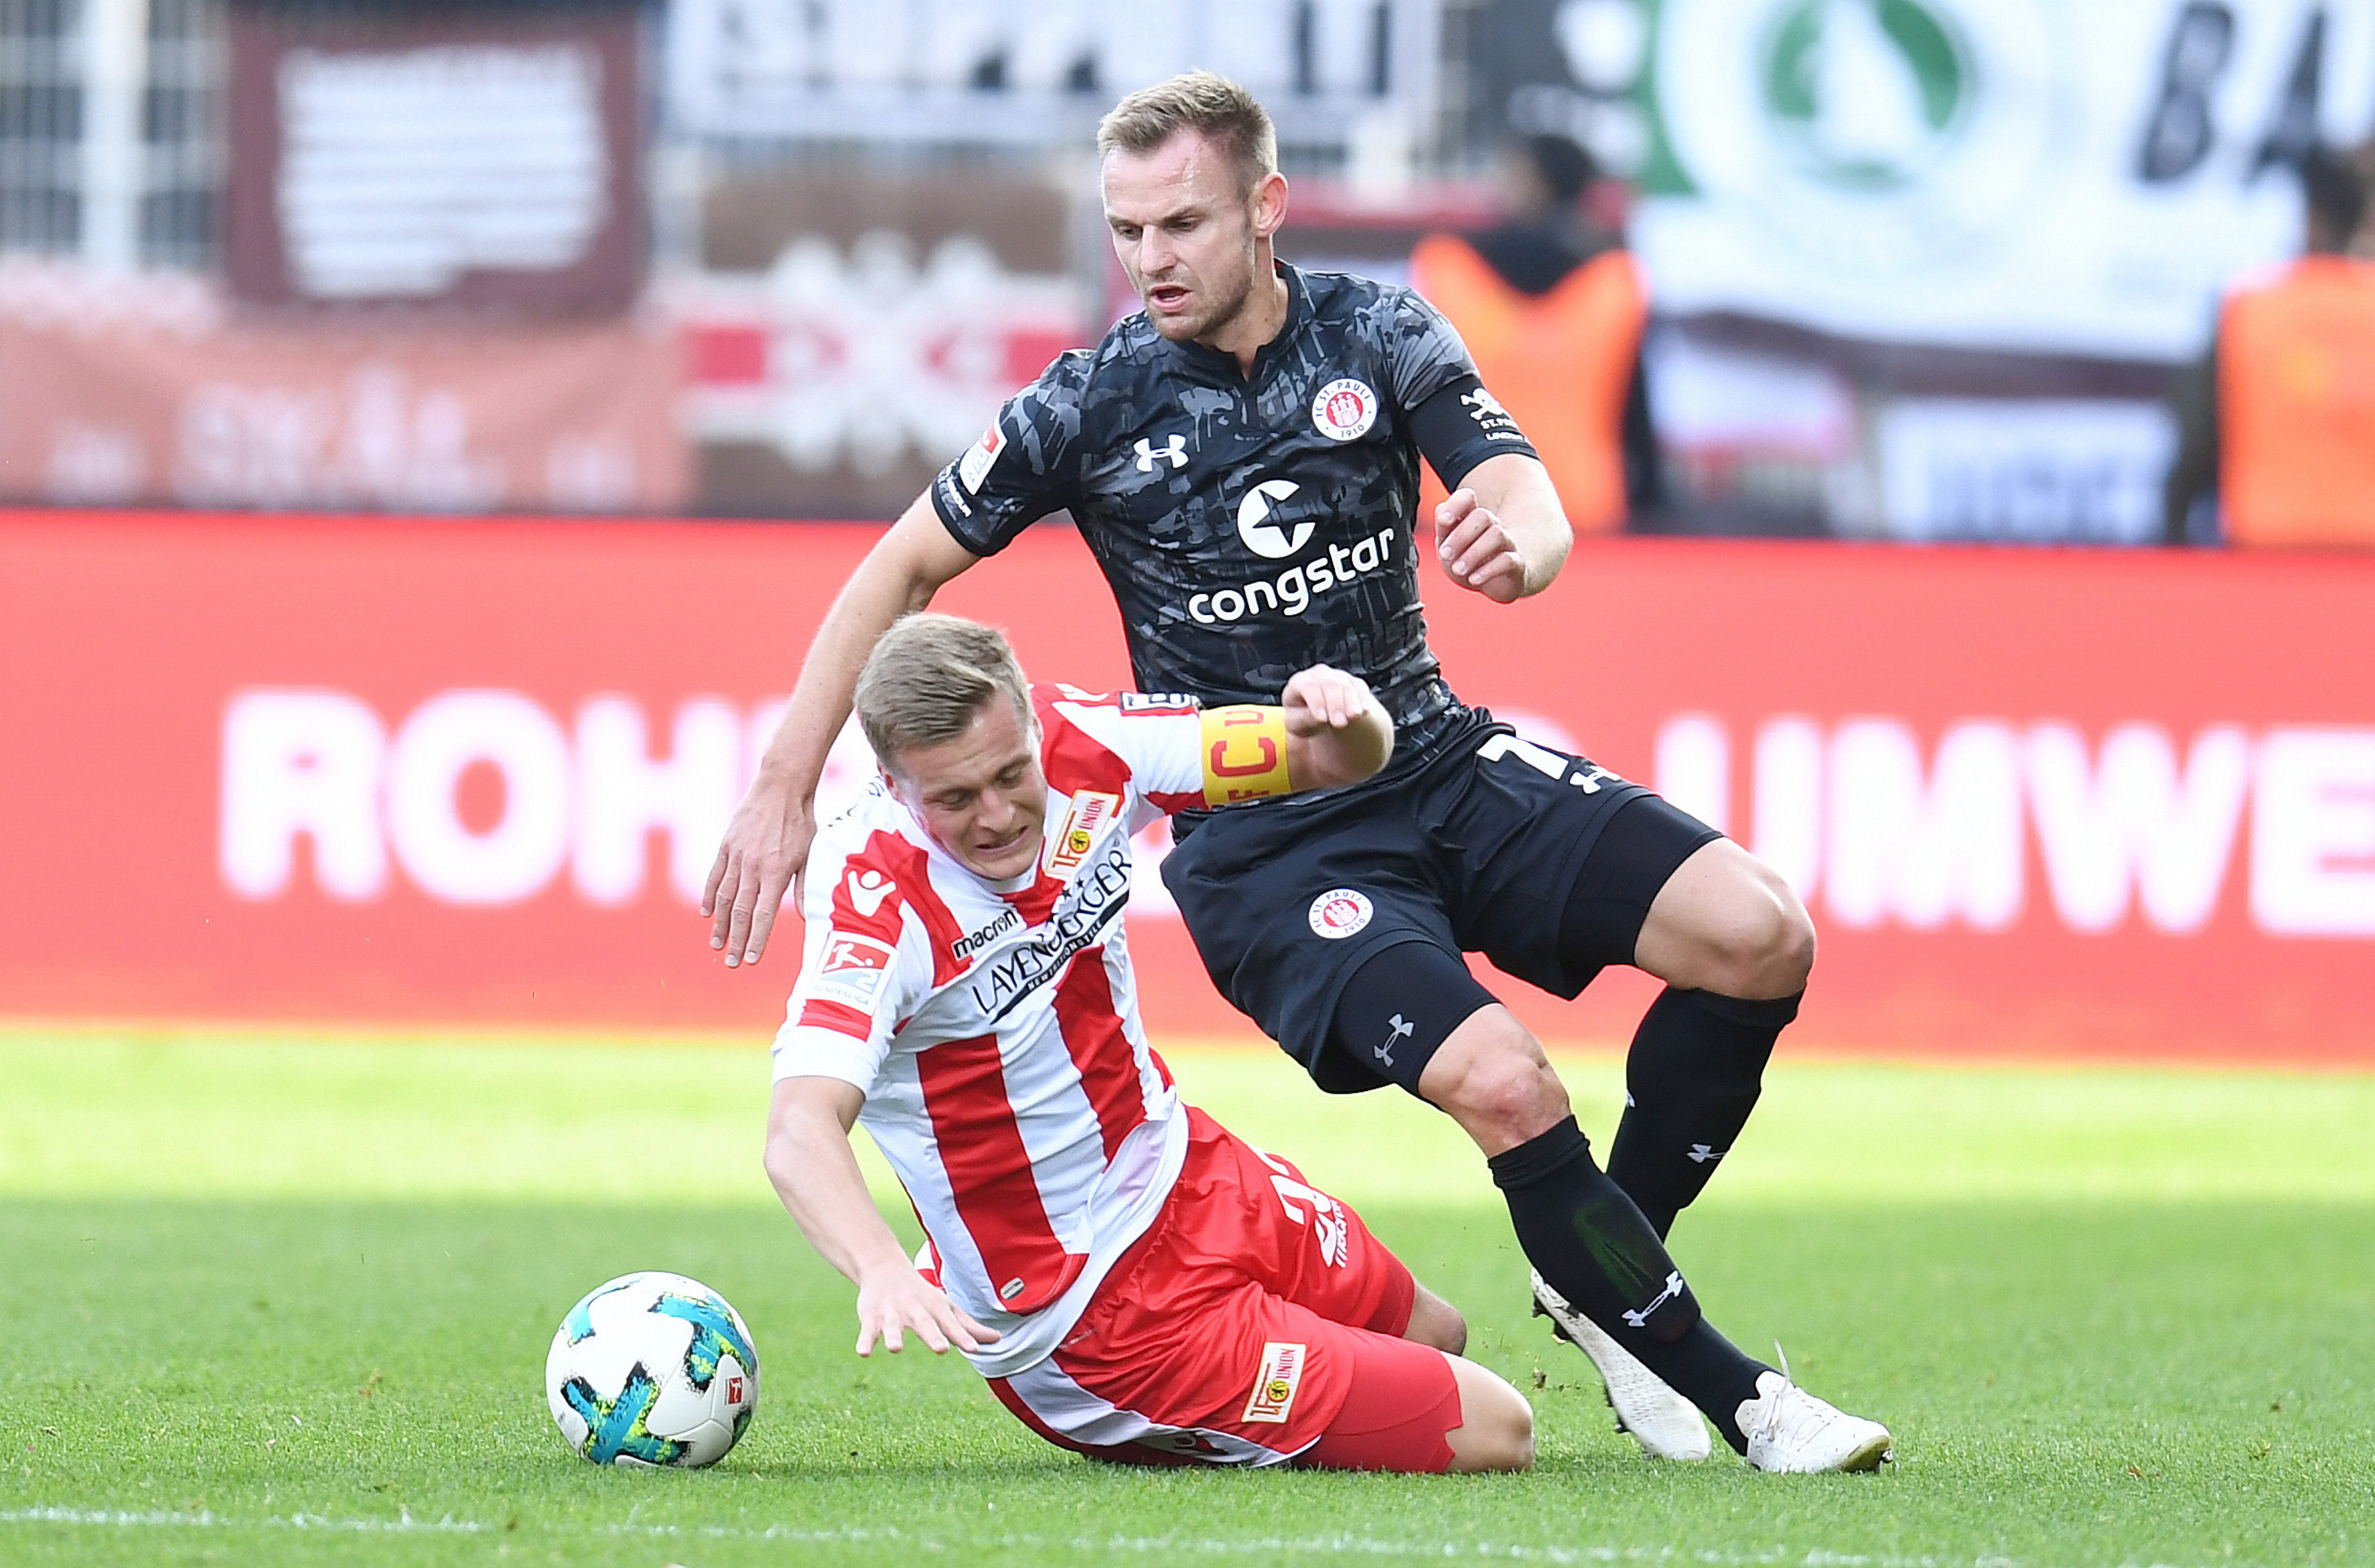 Captains Felix Kroos and Bernd Nehrig battle for the ball in a hard-fought contest.